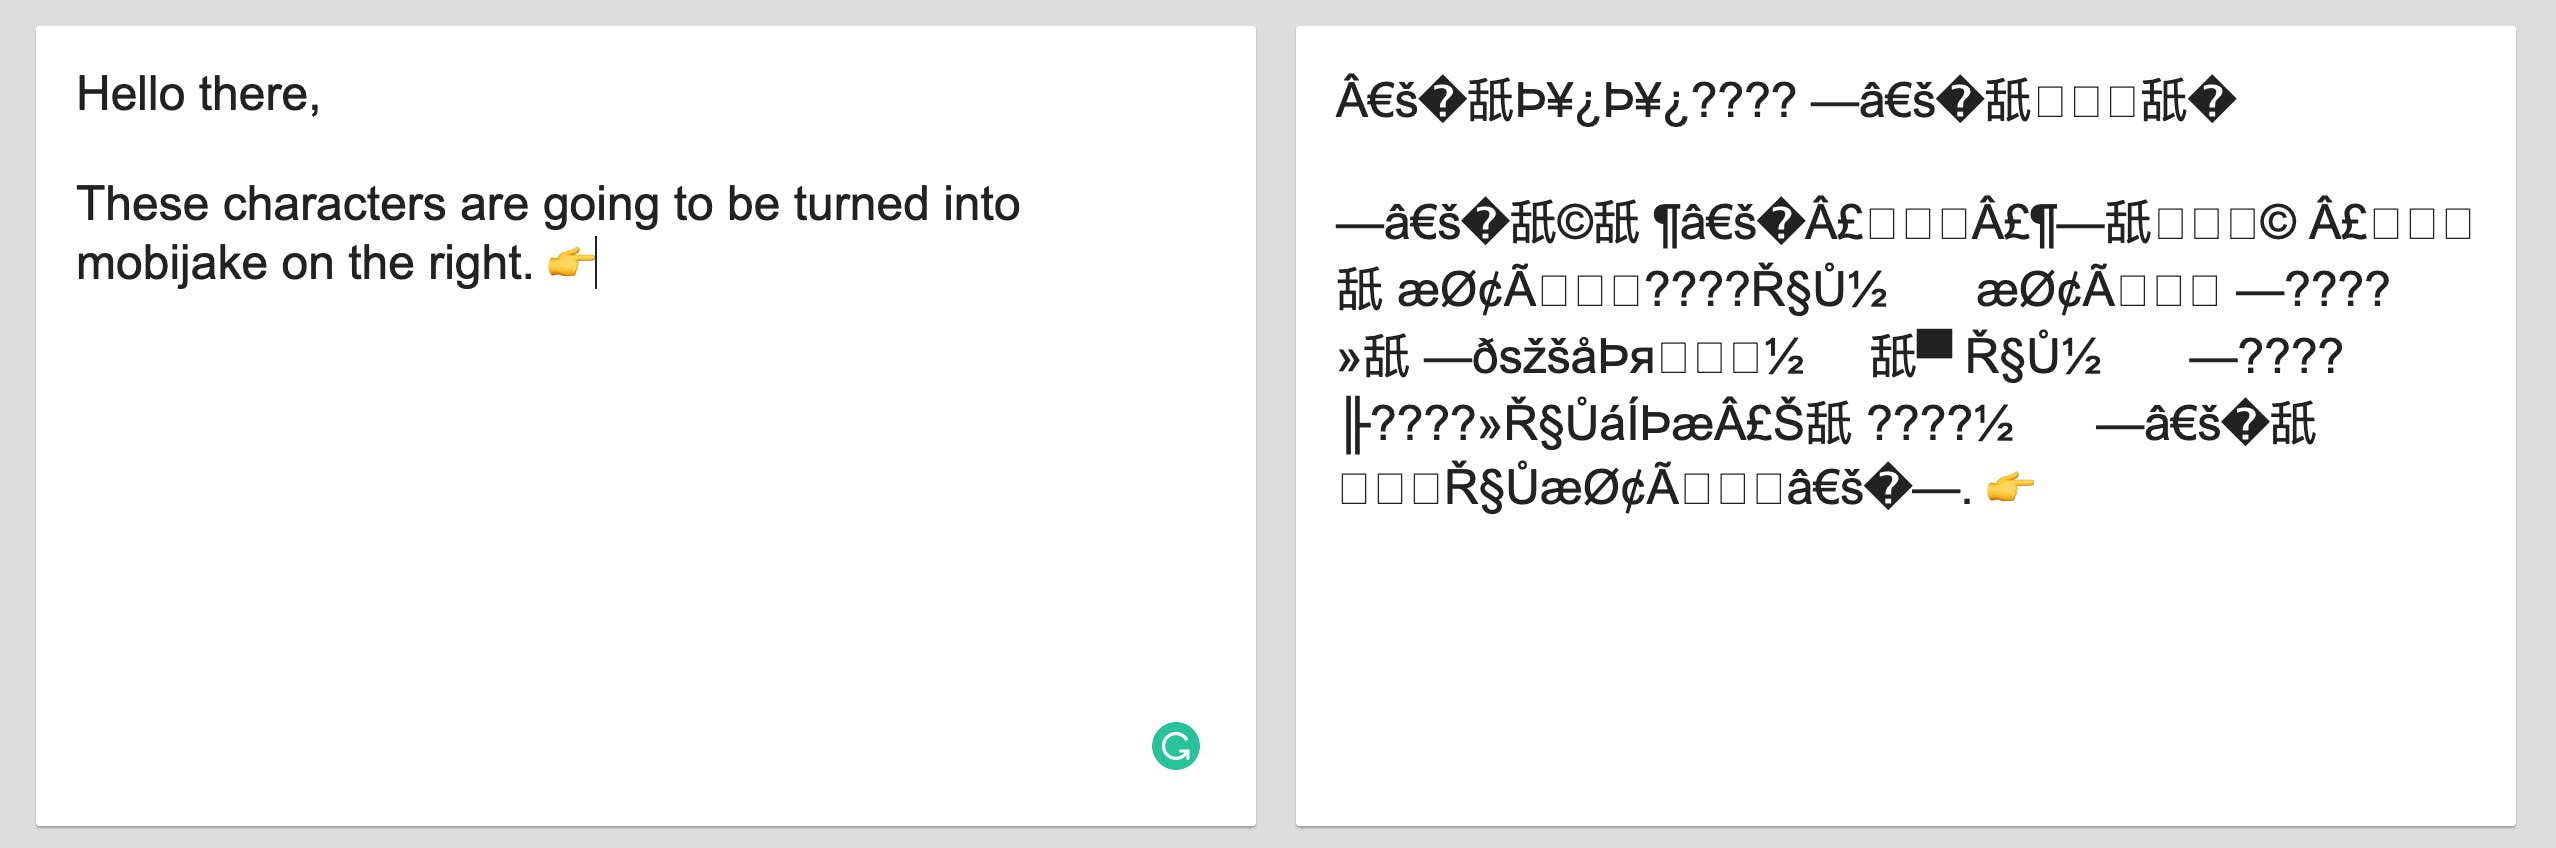 Normal characters on the left and mojibake on the right.